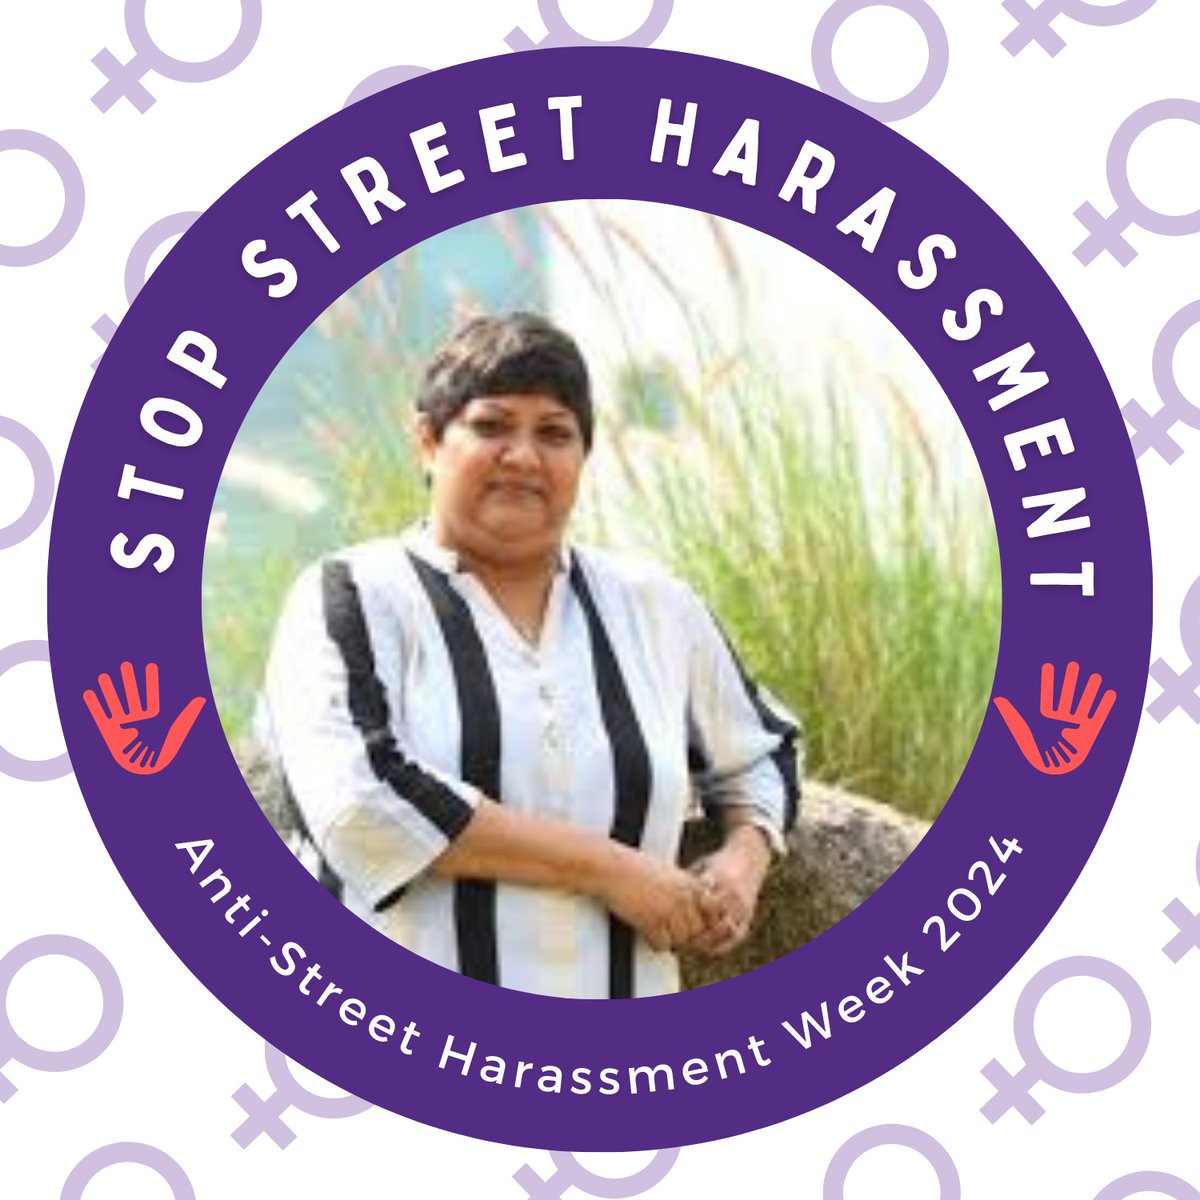 Anti-Street Harassment Week is an imp initiative to raise awareness & advocate for an end to street harassment

SH, violates rights & dignity of victims. Collective action fosters a culture of respect & promote safe, inclusive public spaces 

#AntiSHWeek2024 #StopStreetHarassment